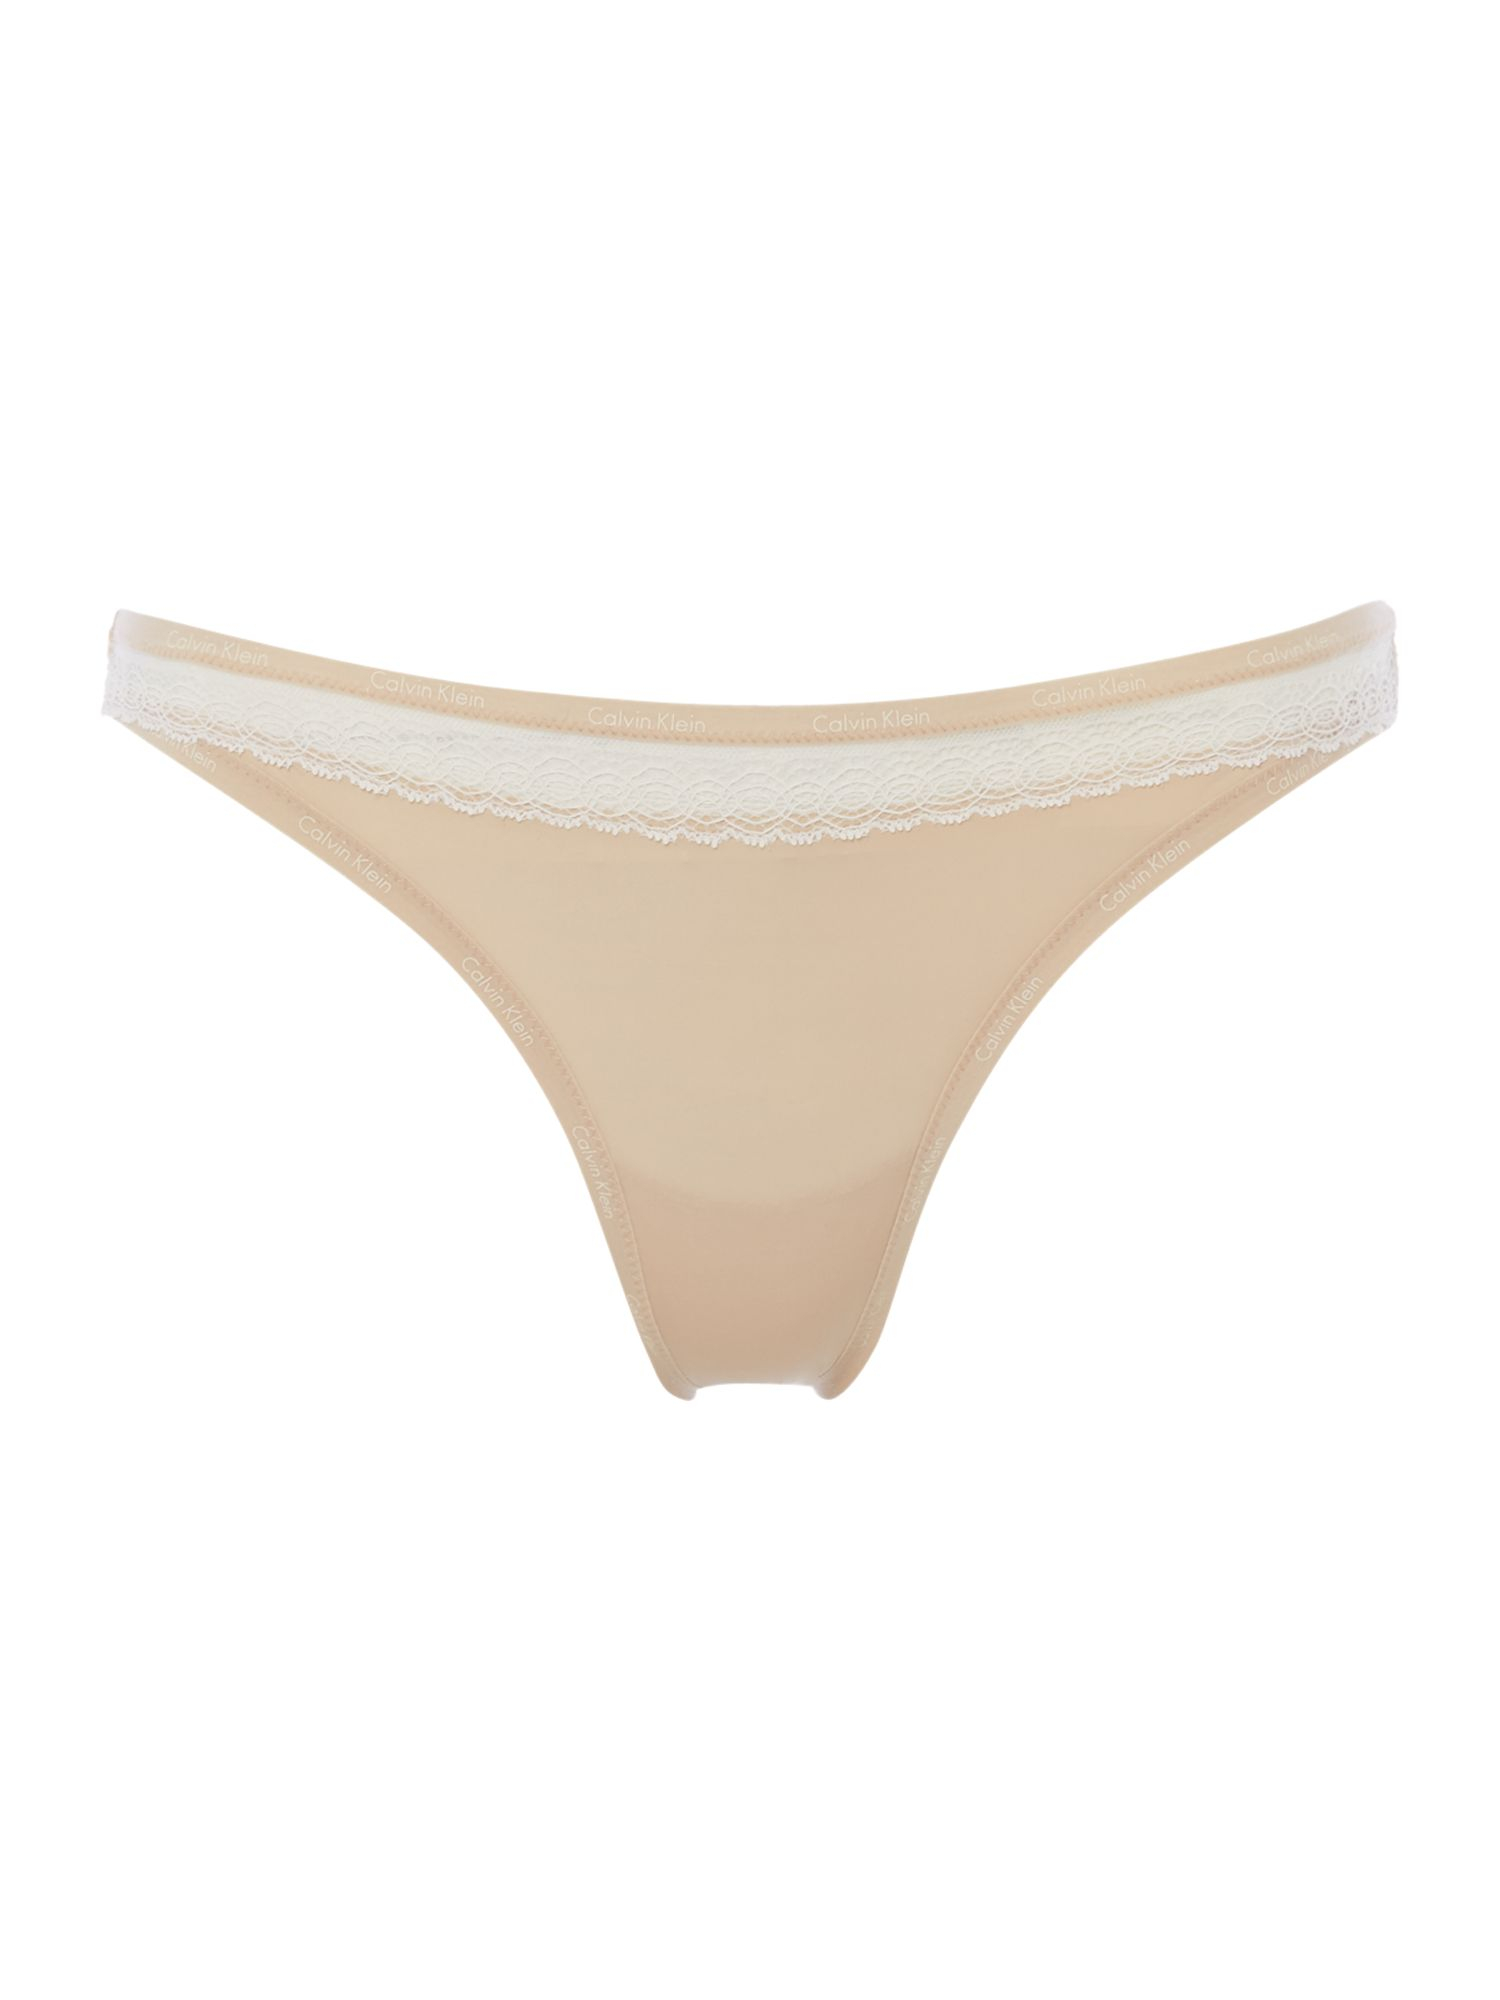 Calvin klein Perfectly Fit Sexy Signature Thong with Lace in White | Lyst